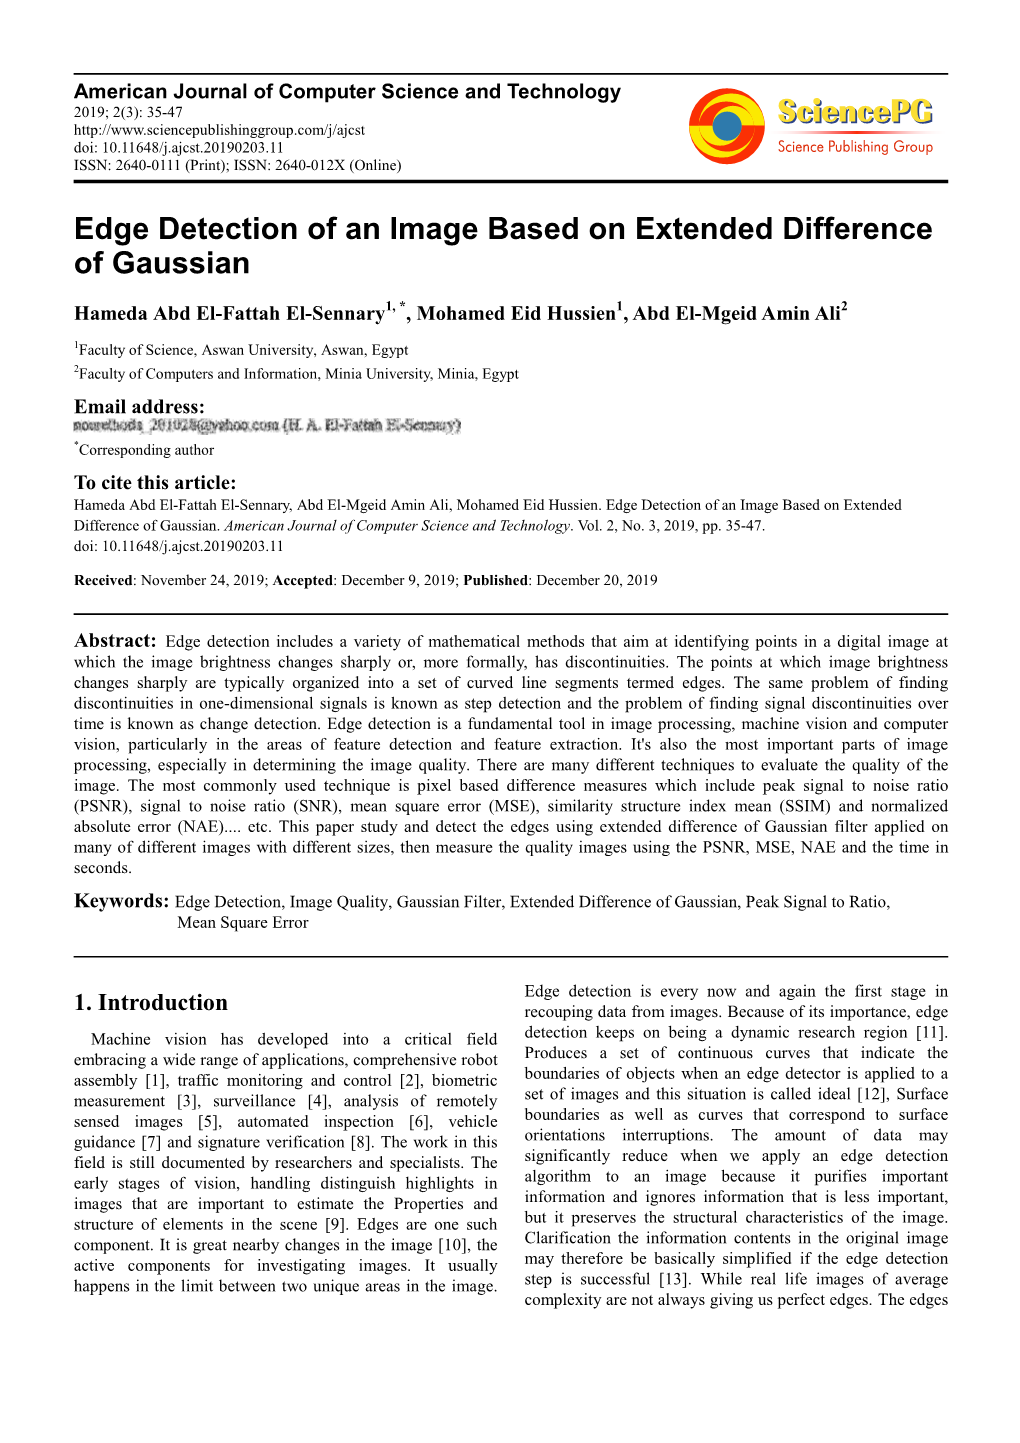 Edge Detection of an Image Based on Extended Difference of Gaussian